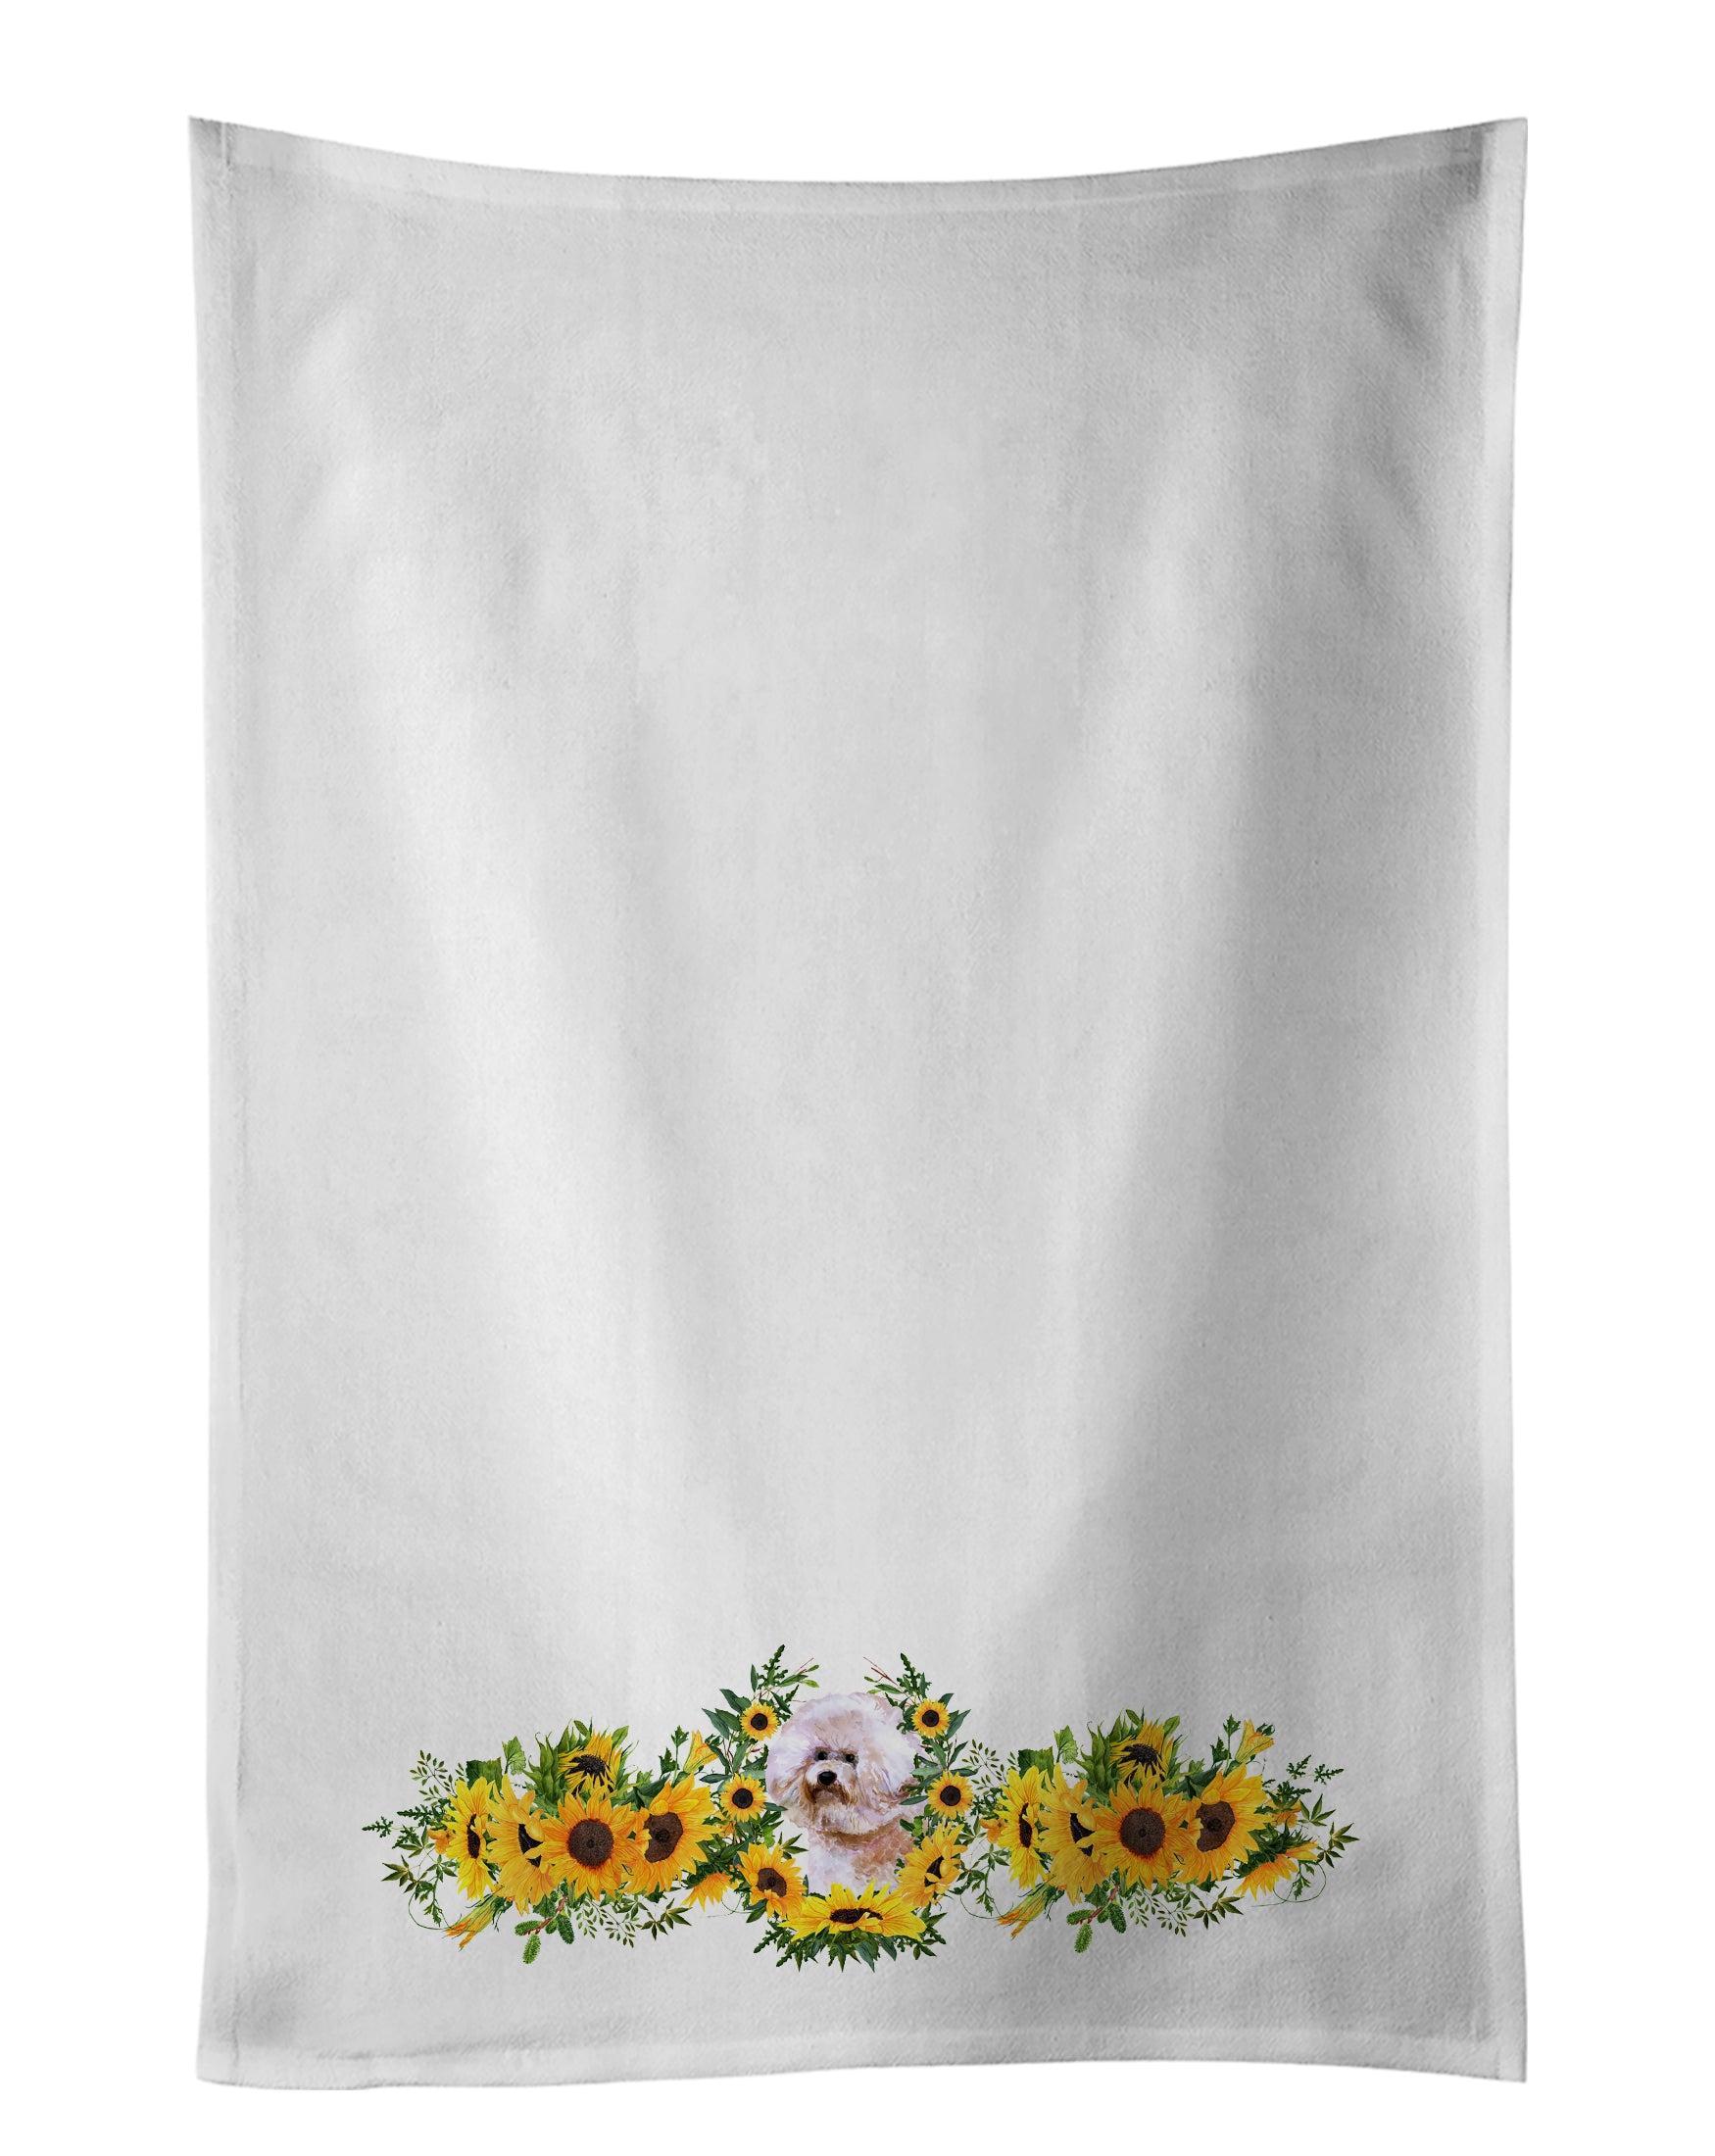 Buy this Bichon Frise #2 in Sunflowers White Kitchen Towel Set of 2